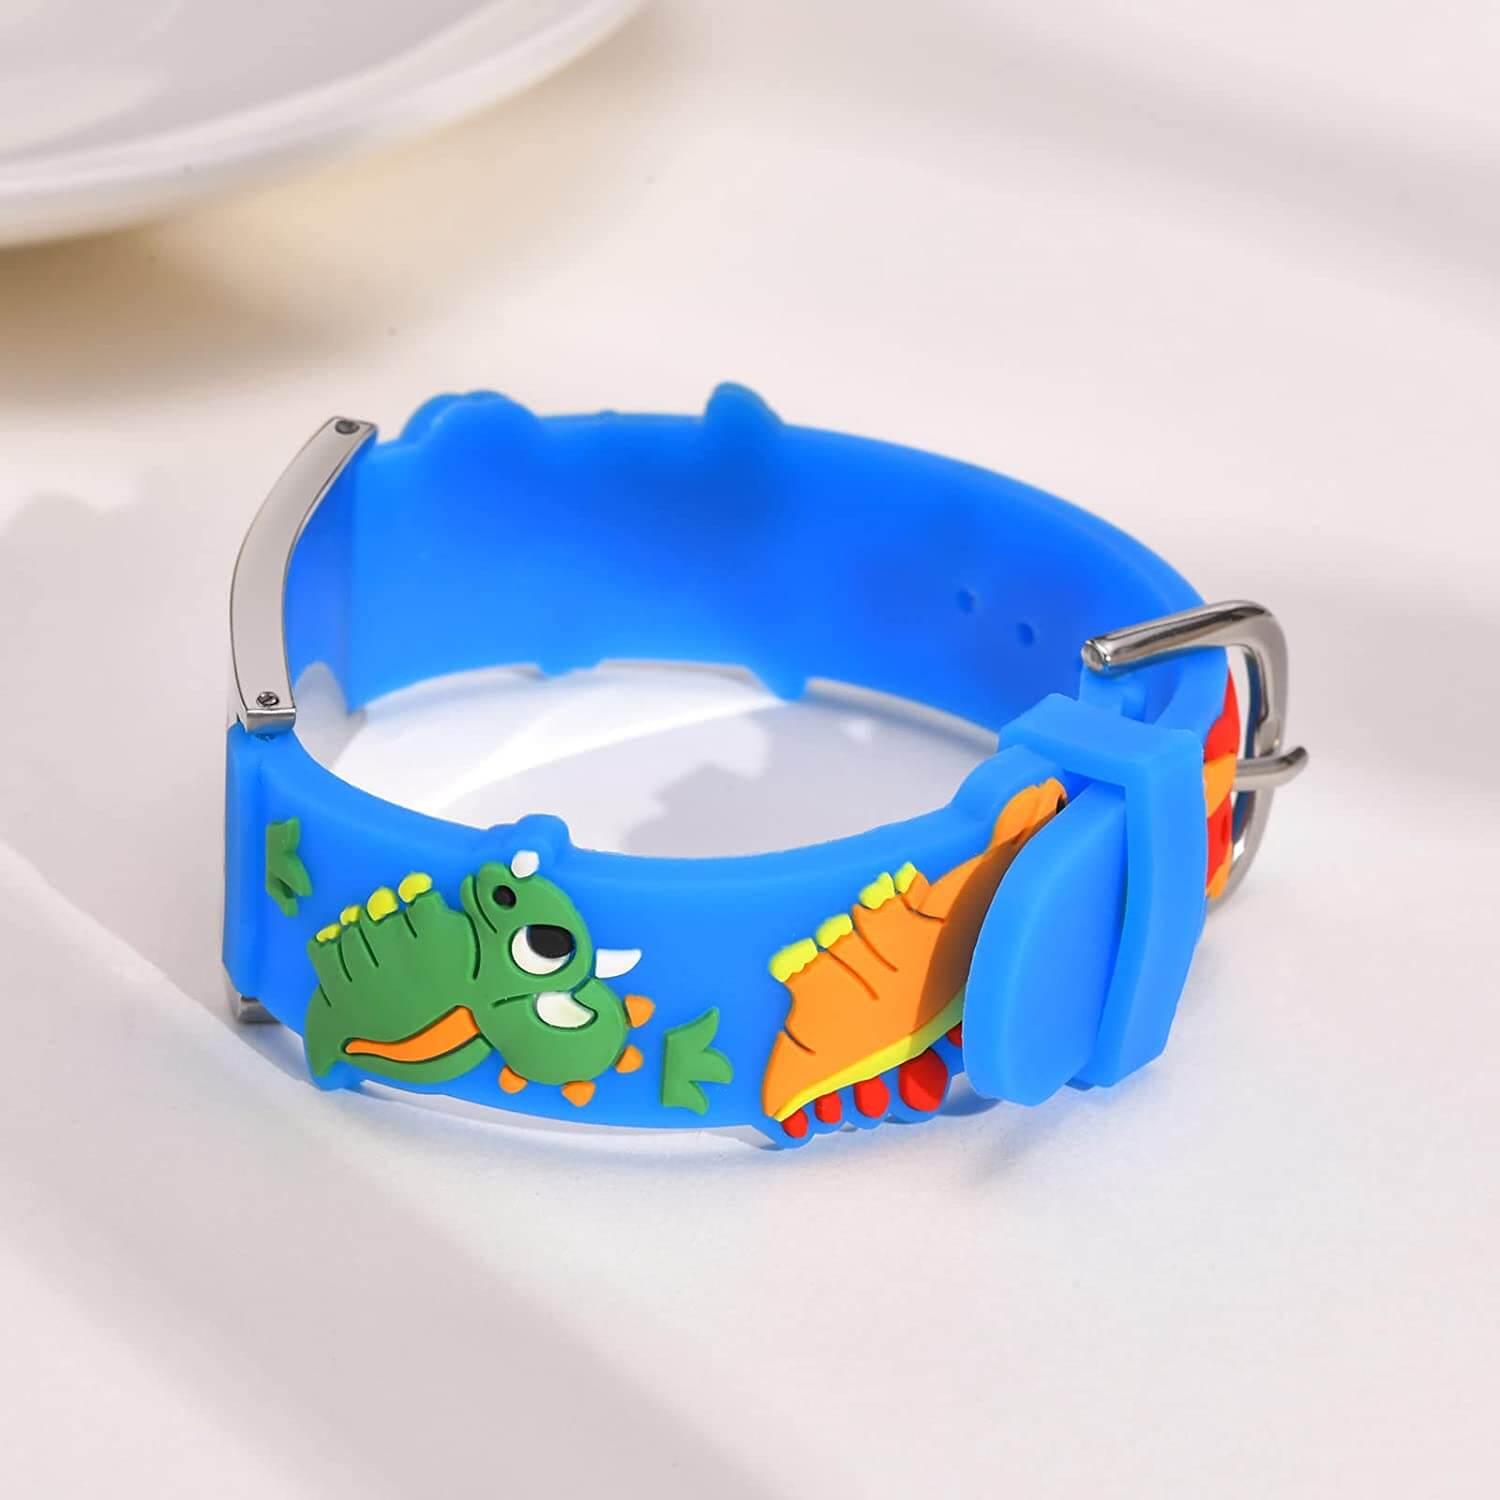 Side view of medical alert bracelet for a child. Bracelet band is made of blue silicone with a dinosaur design.